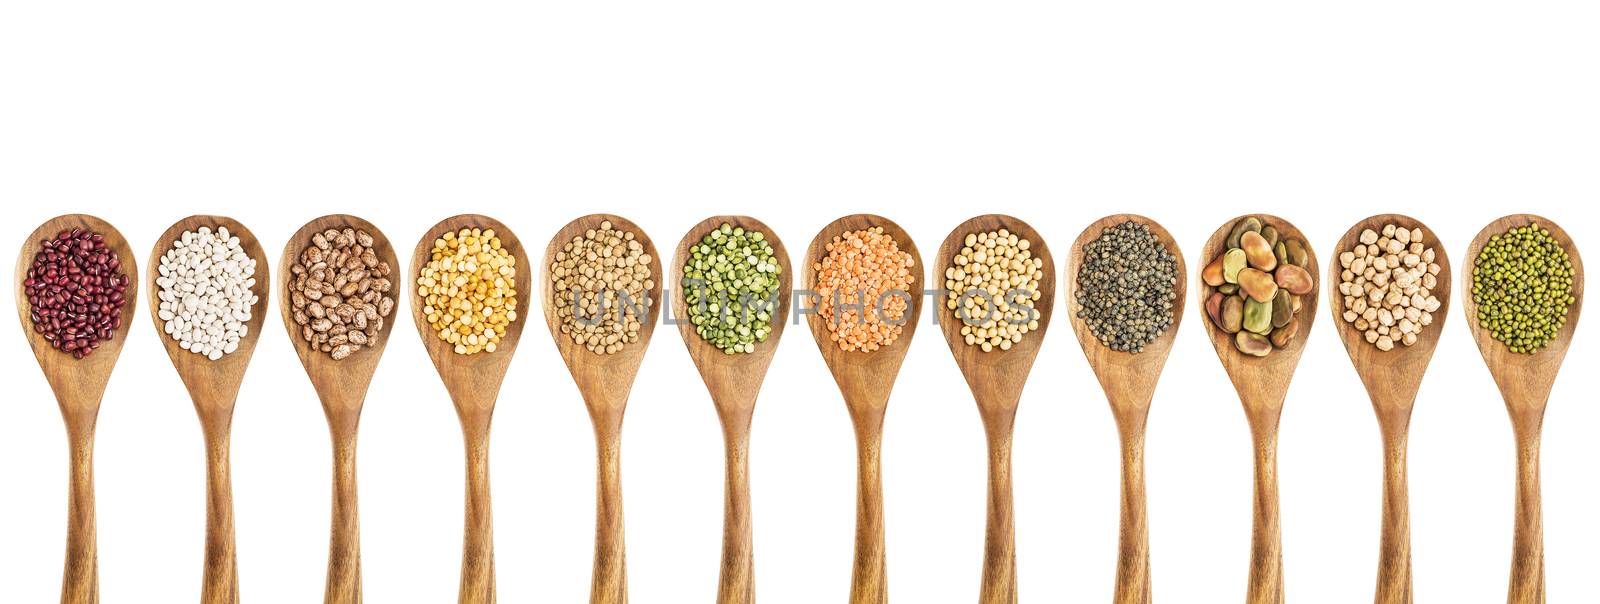 beans, lentils and pea - a collection of food ingredient on isolated wooden spoons